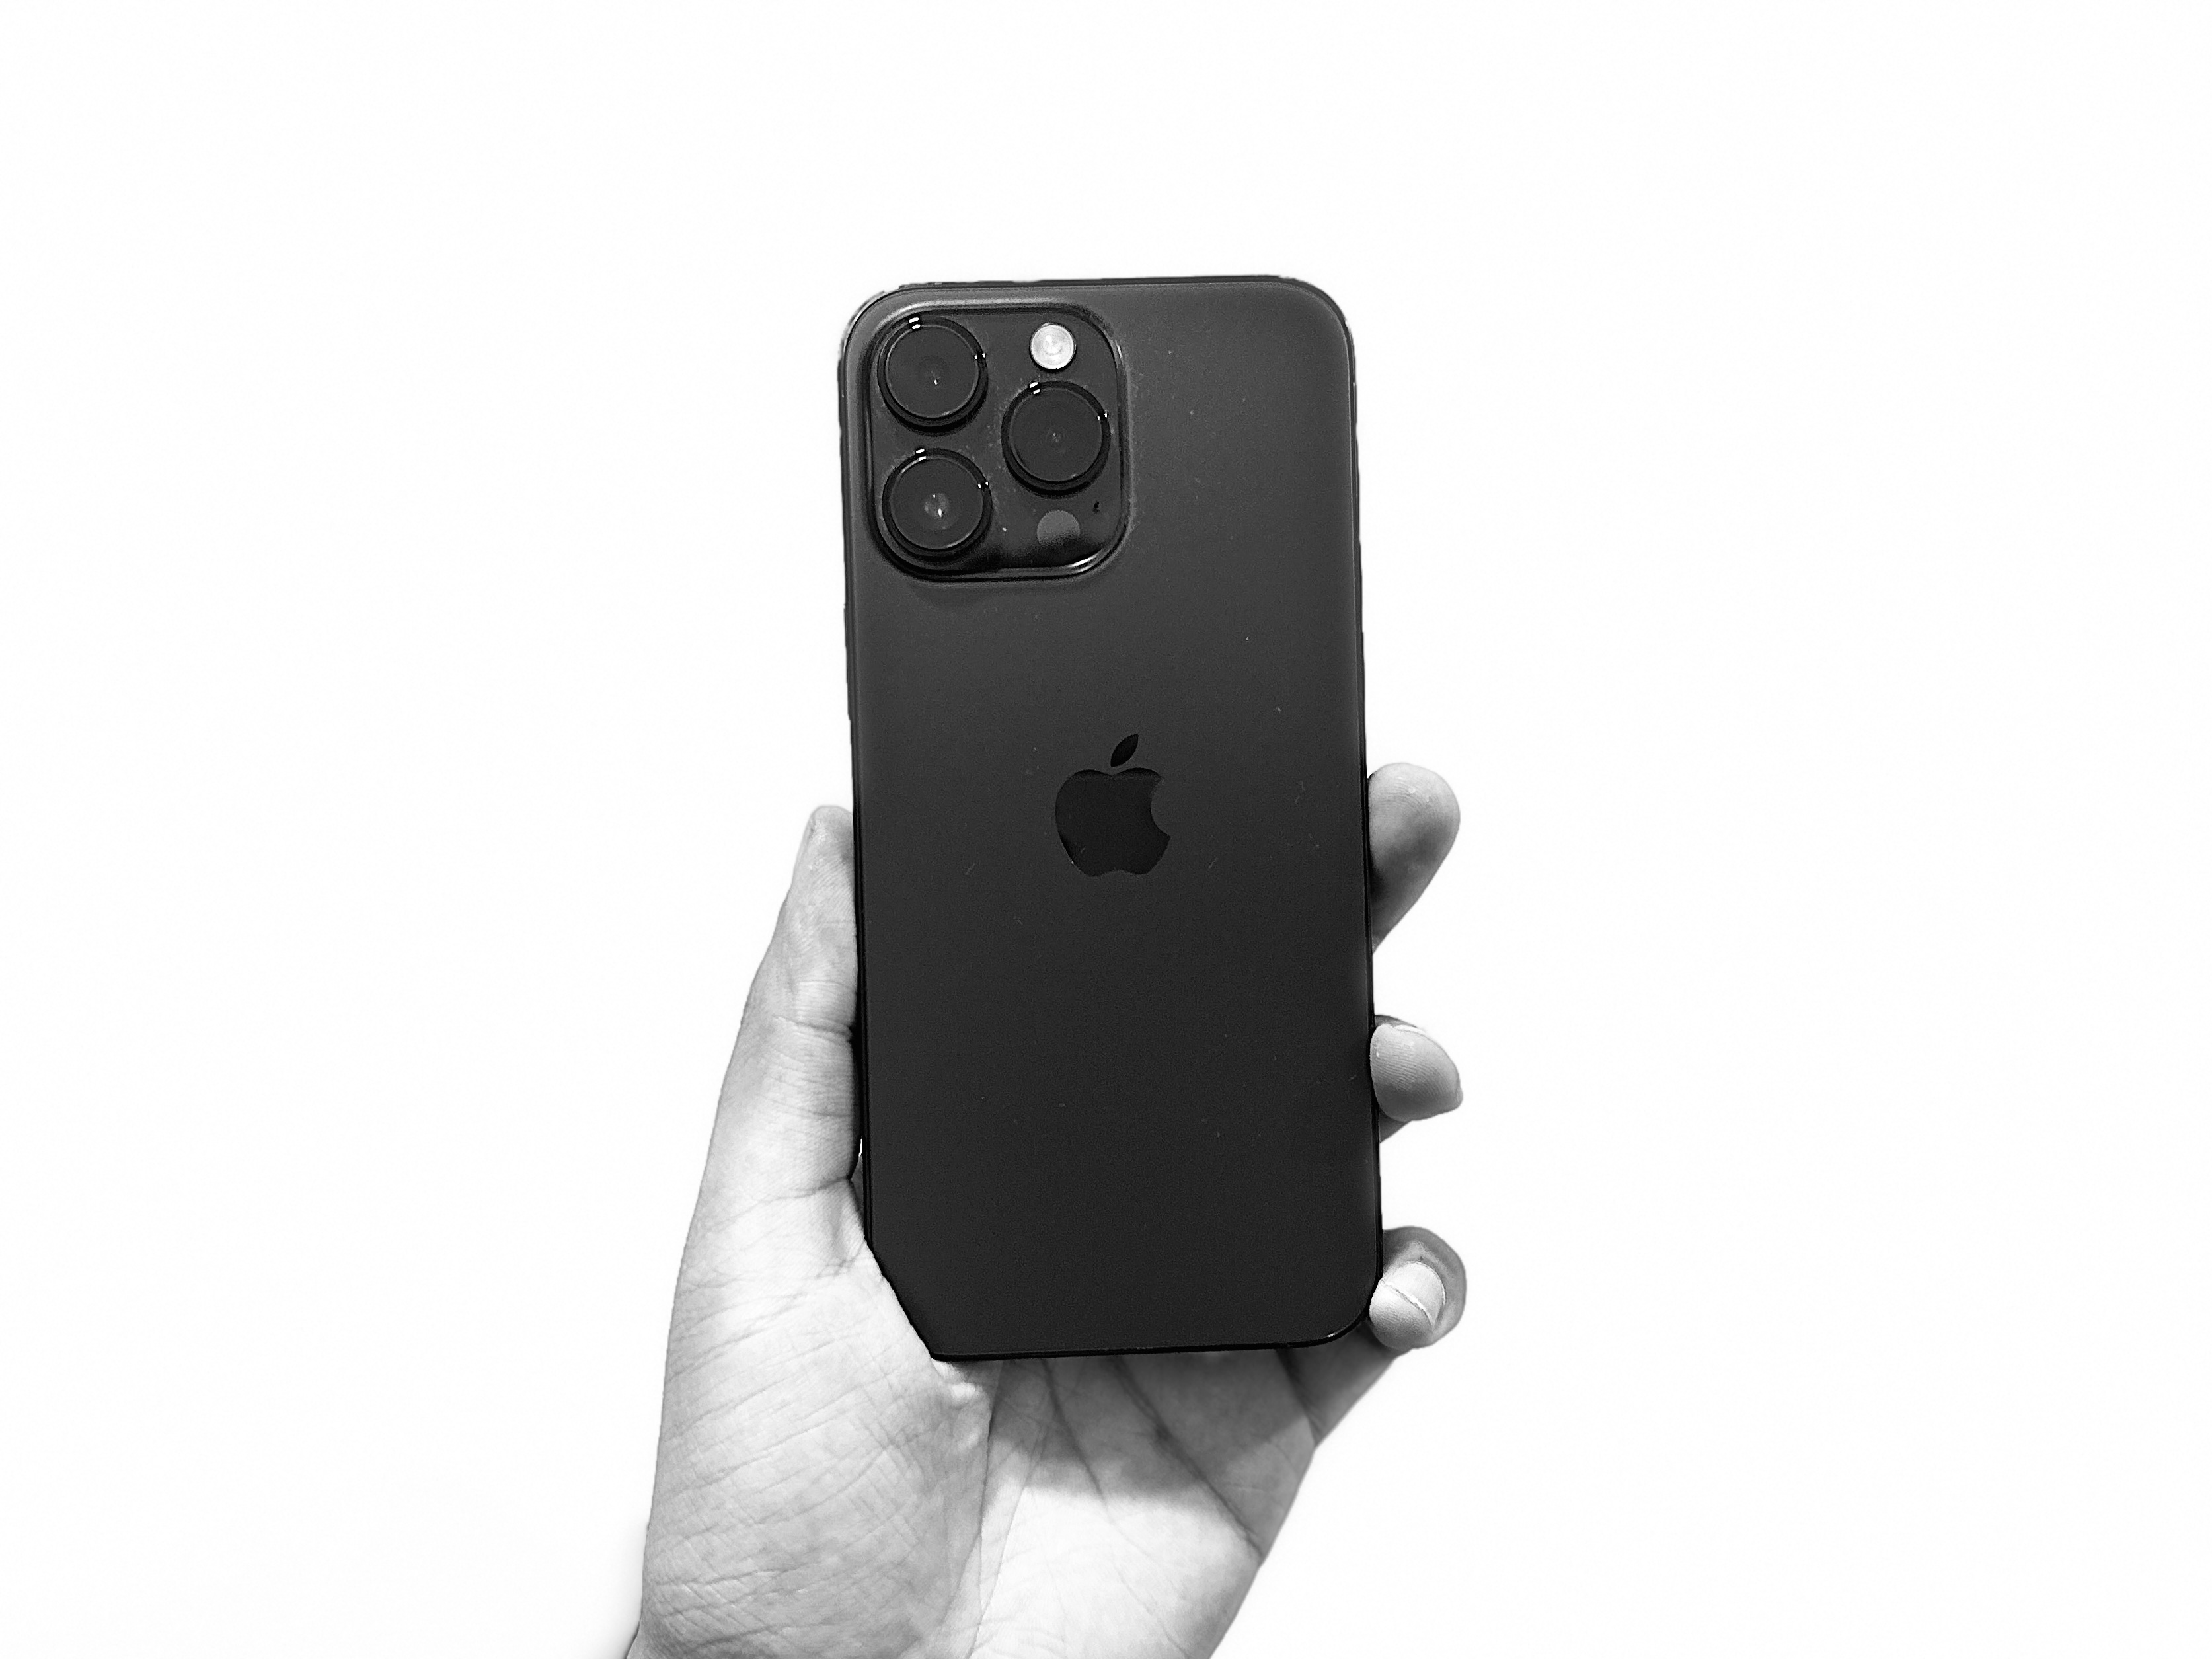 iPhone 14 Pro Max in black and white.